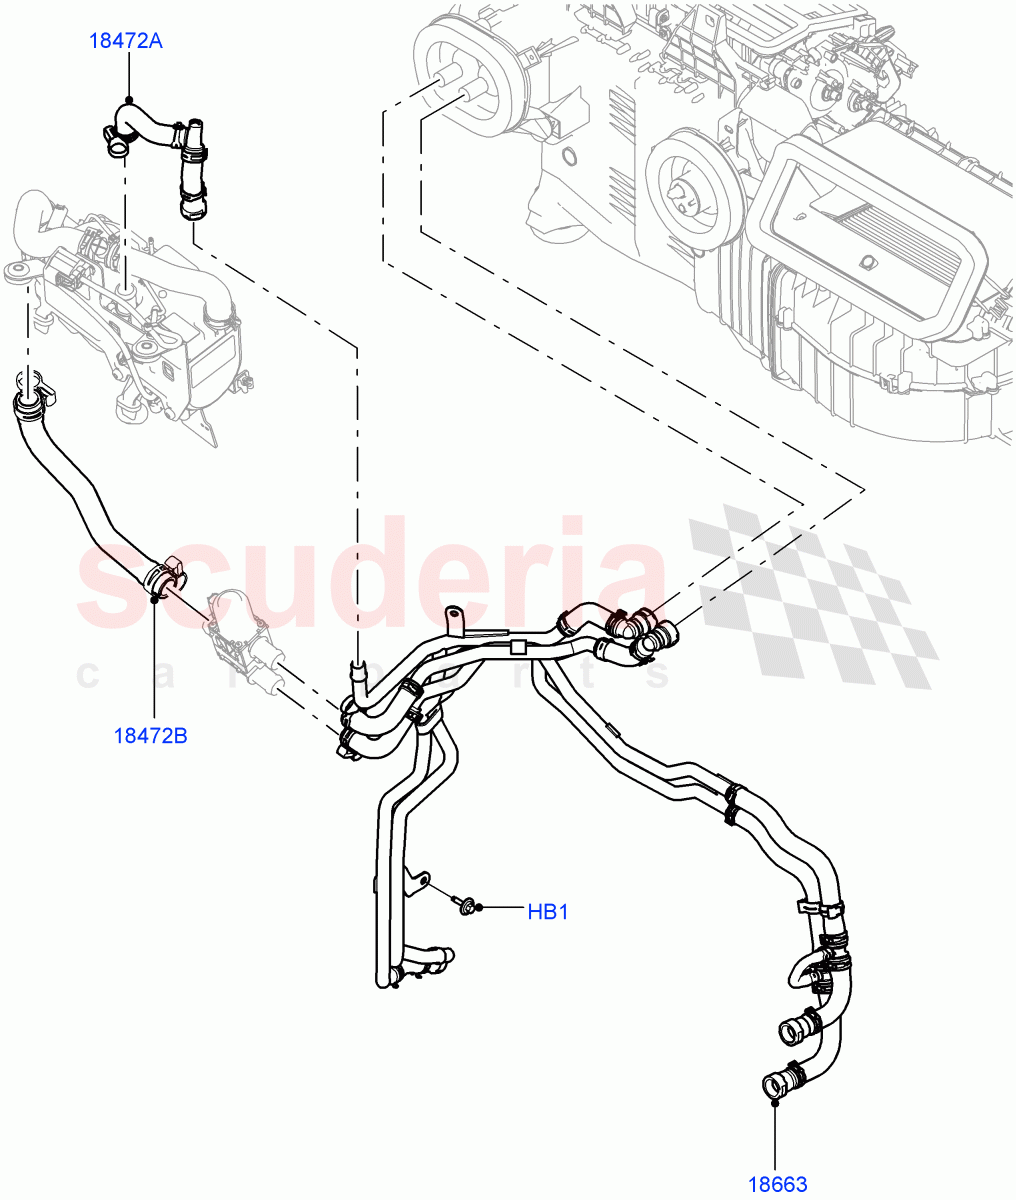 Heater Hoses(Solihull Plant Build)(2.0L I4 DSL MID DOHC AJ200,With Fuel Fired Heater,With Air Conditioning - Front/Rear,Park Heating With Remote Control,2.0L I4 DSL HIGH DOHC AJ200)((V)FROMHA000001,(V)TOHA999999) of Land Rover Land Rover Discovery 5 (2017+) [3.0 DOHC GDI SC V6 Petrol]